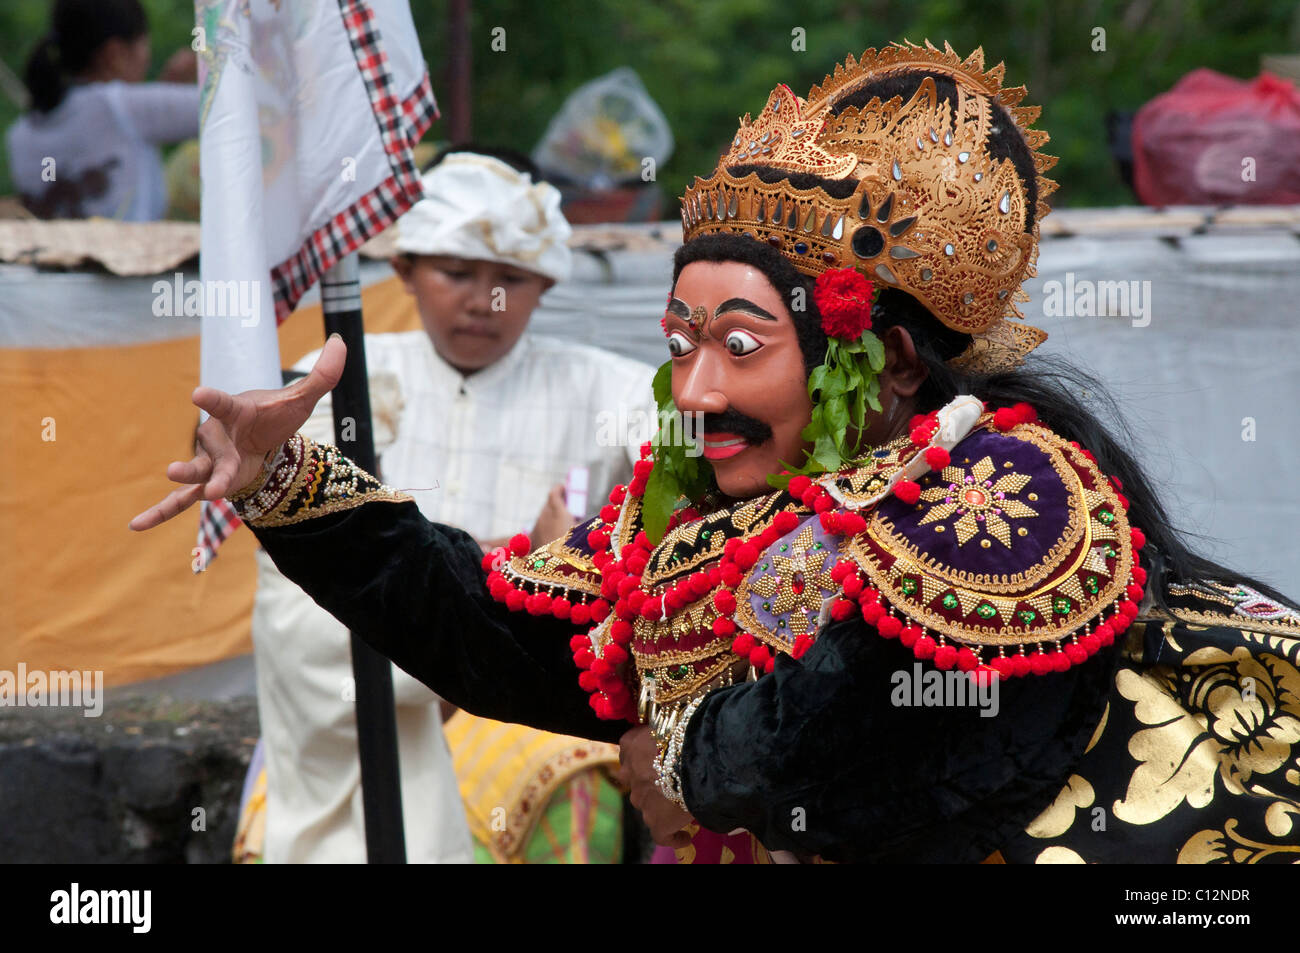 Performer wearing a topeng mask at a performance at a temple ceremony in Padang Bai Bali Indonesia Stock Photo